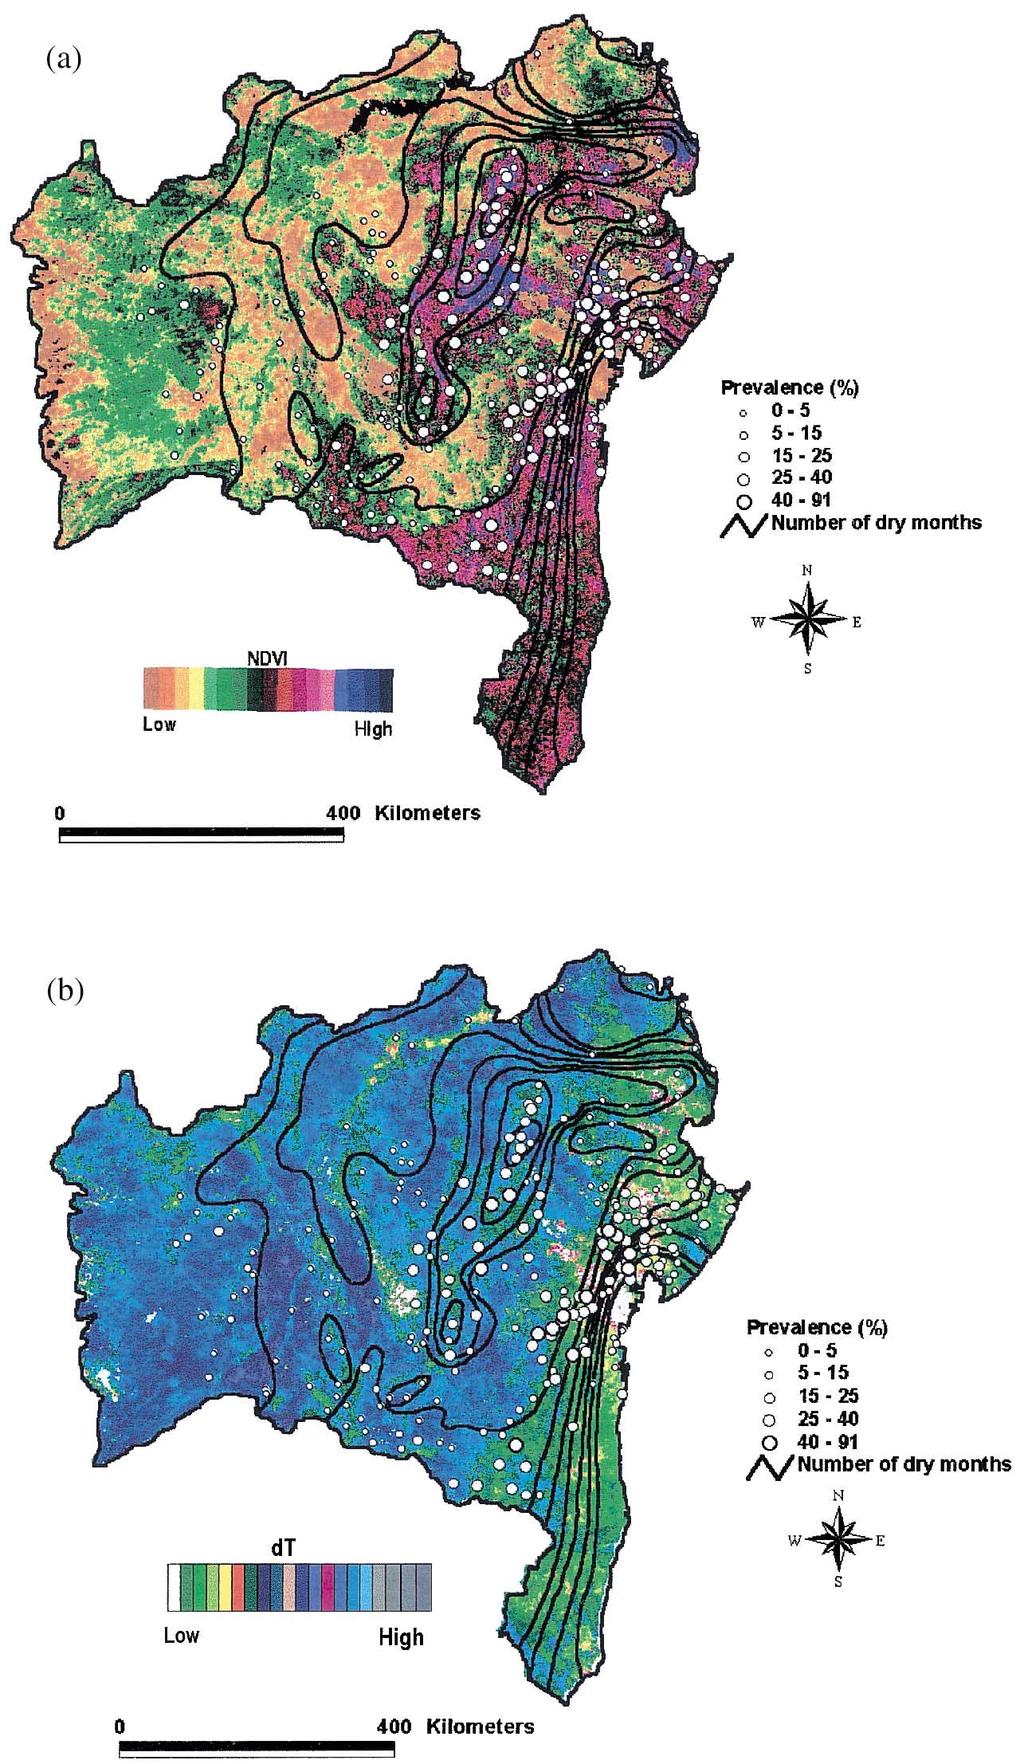 M.E. Ba ia et al. / Acta Tropica 79 (2001) 79 85 83 Fig. 2. Prevalence of S. mansoni and annual number of dry months overlaid on an annual composite NDVI map (a) (low=0 and high=0.